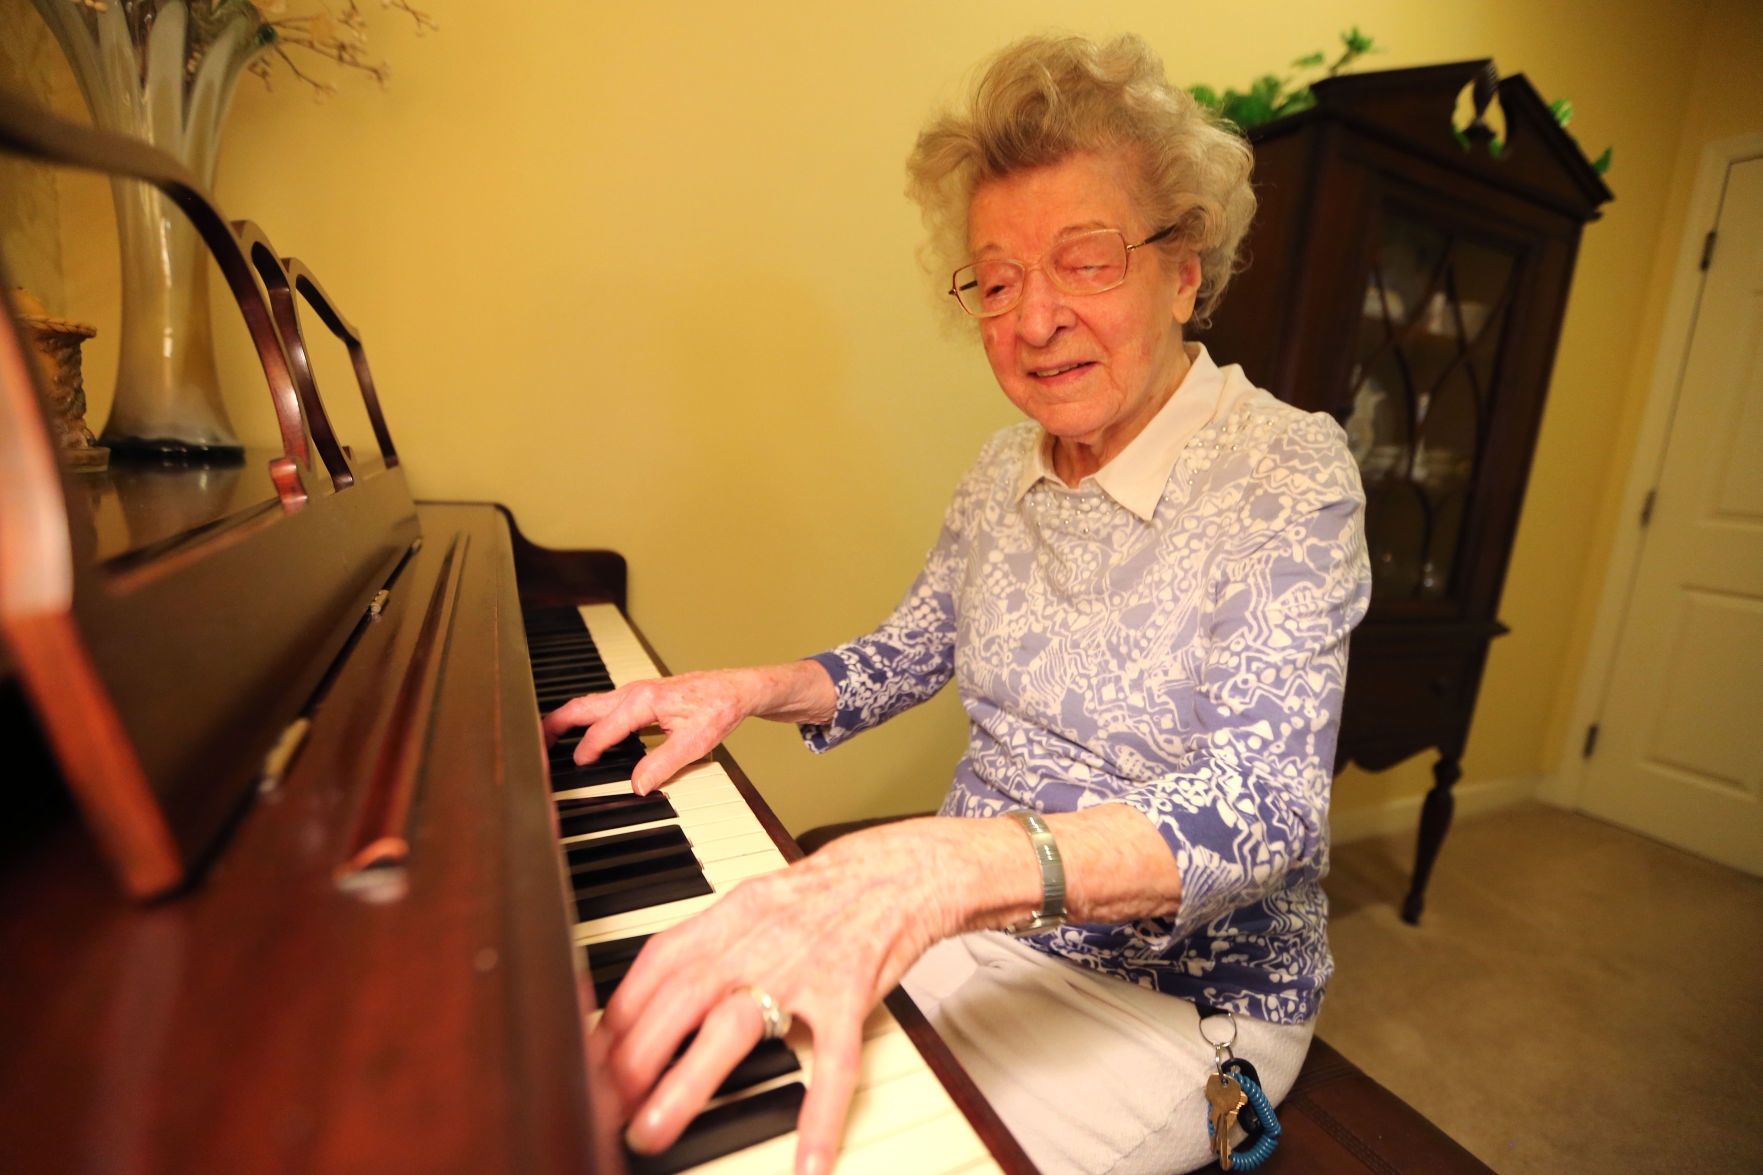 Playing a piano at the age of 108. (Photo credit: djournal.com)